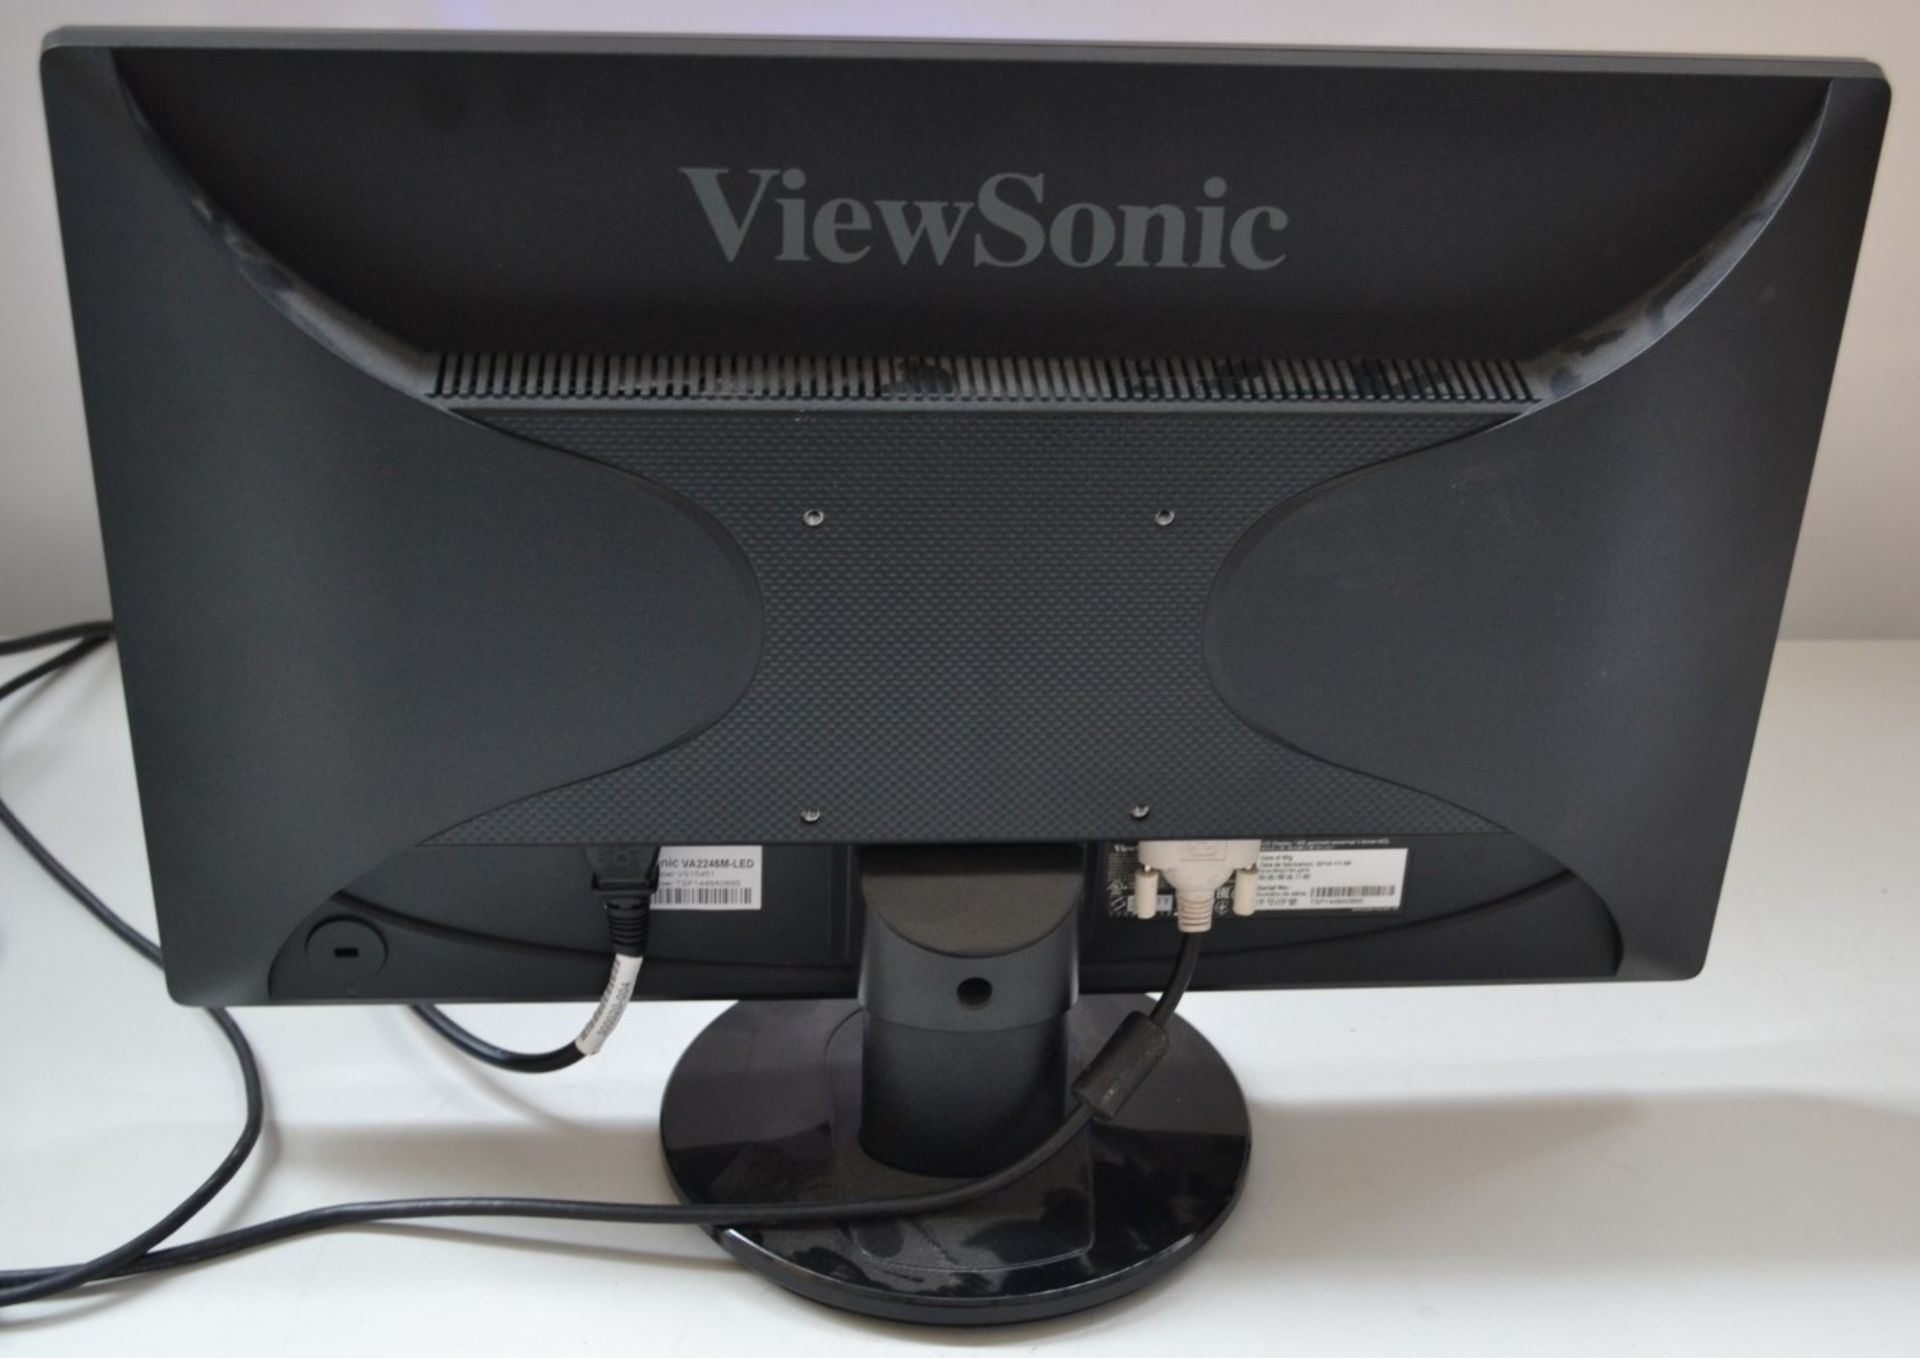 1 x View Sonic VA2246MLED 22" Widescreen PC Monitor - Ref J2244 - Image 2 of 2